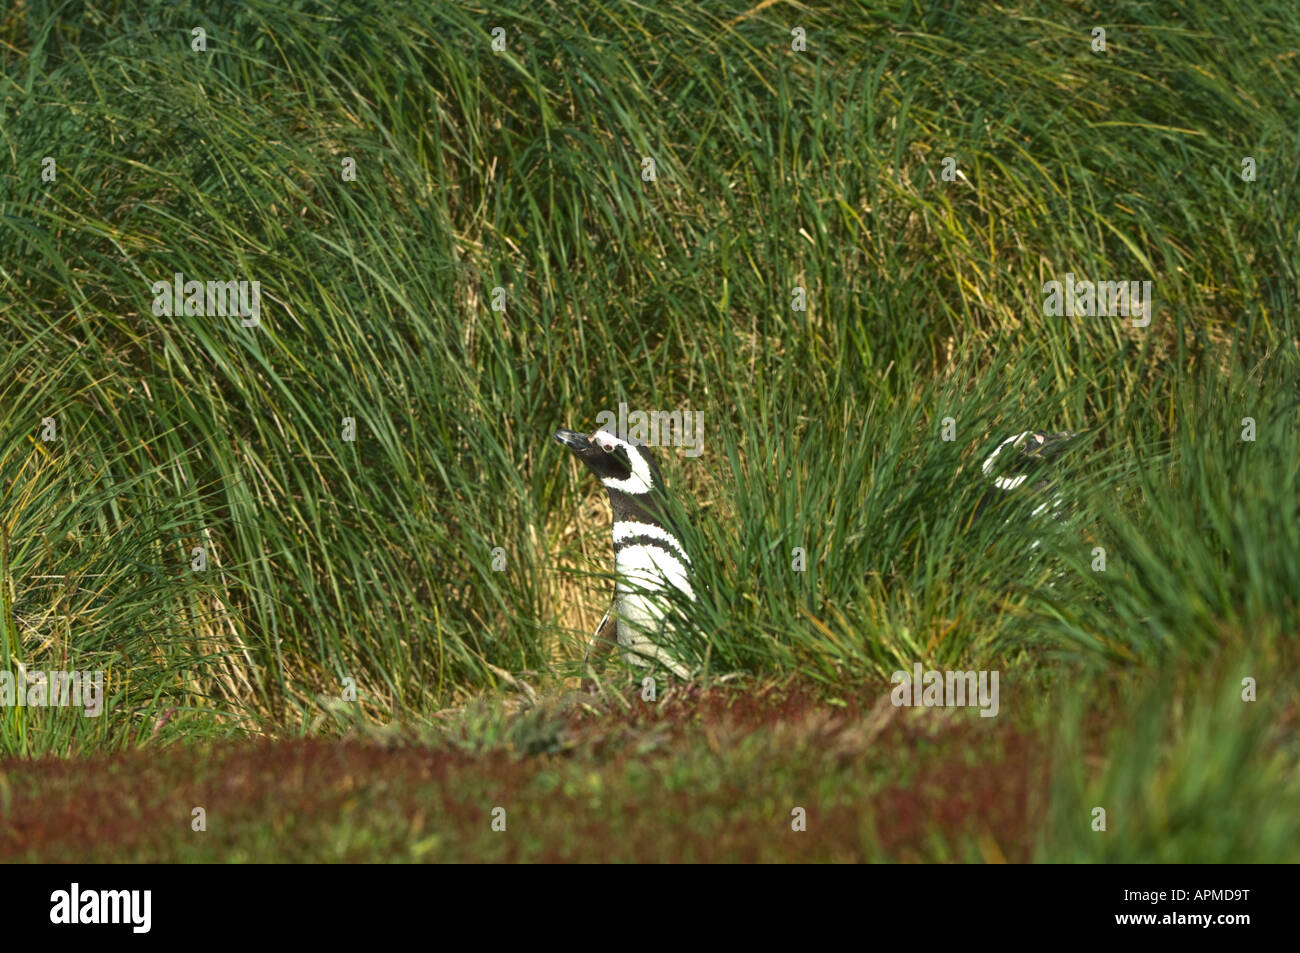 Magellanic Penguin Spheniscus magellanicus adult coming out of tussac grass into meadow with flowering Rumex acetosella Stock Photo